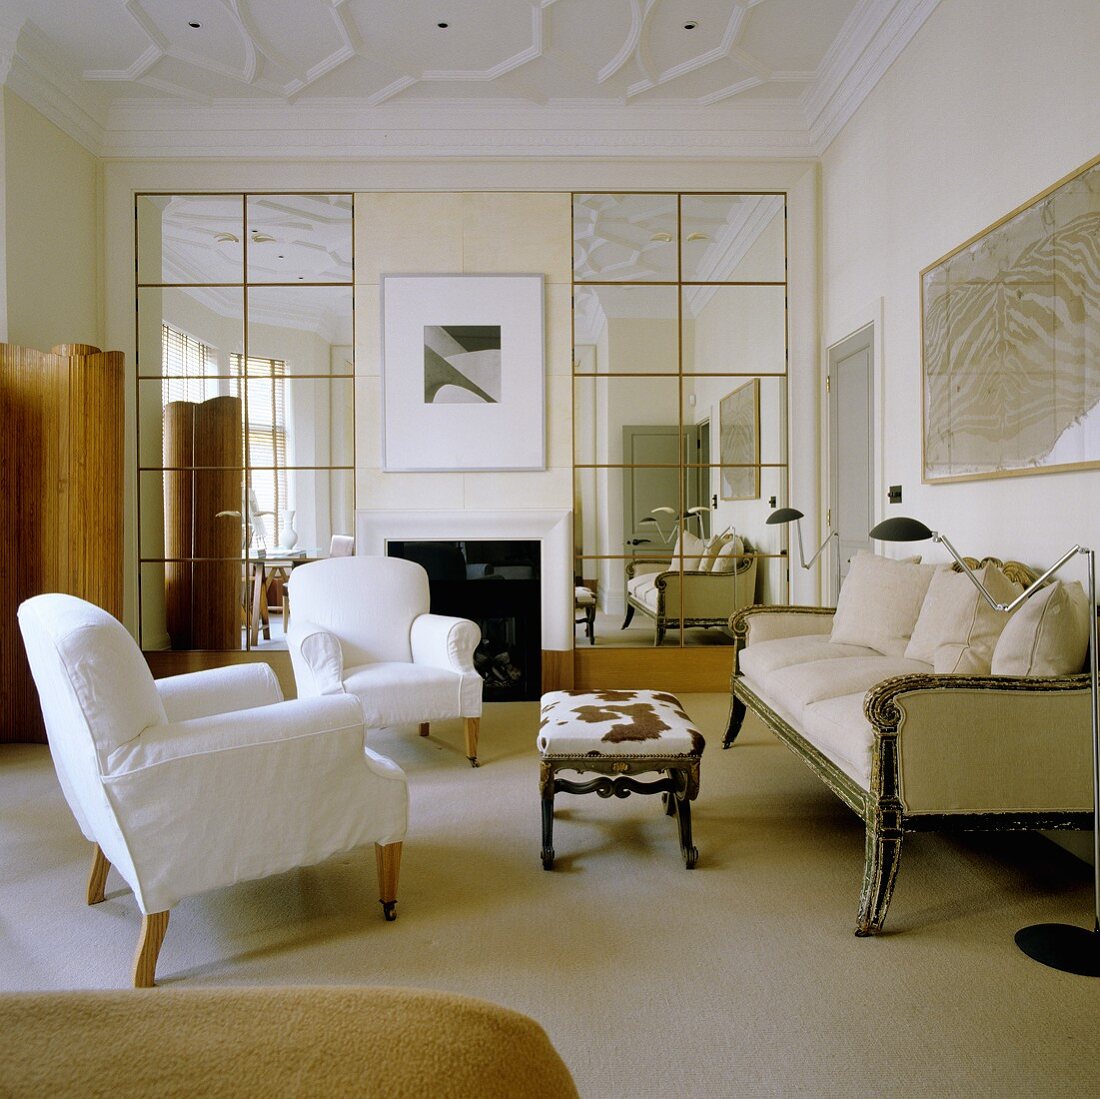 Covered armchairs, an antique three-seater sofa and a side table with a fur cover in an English living room